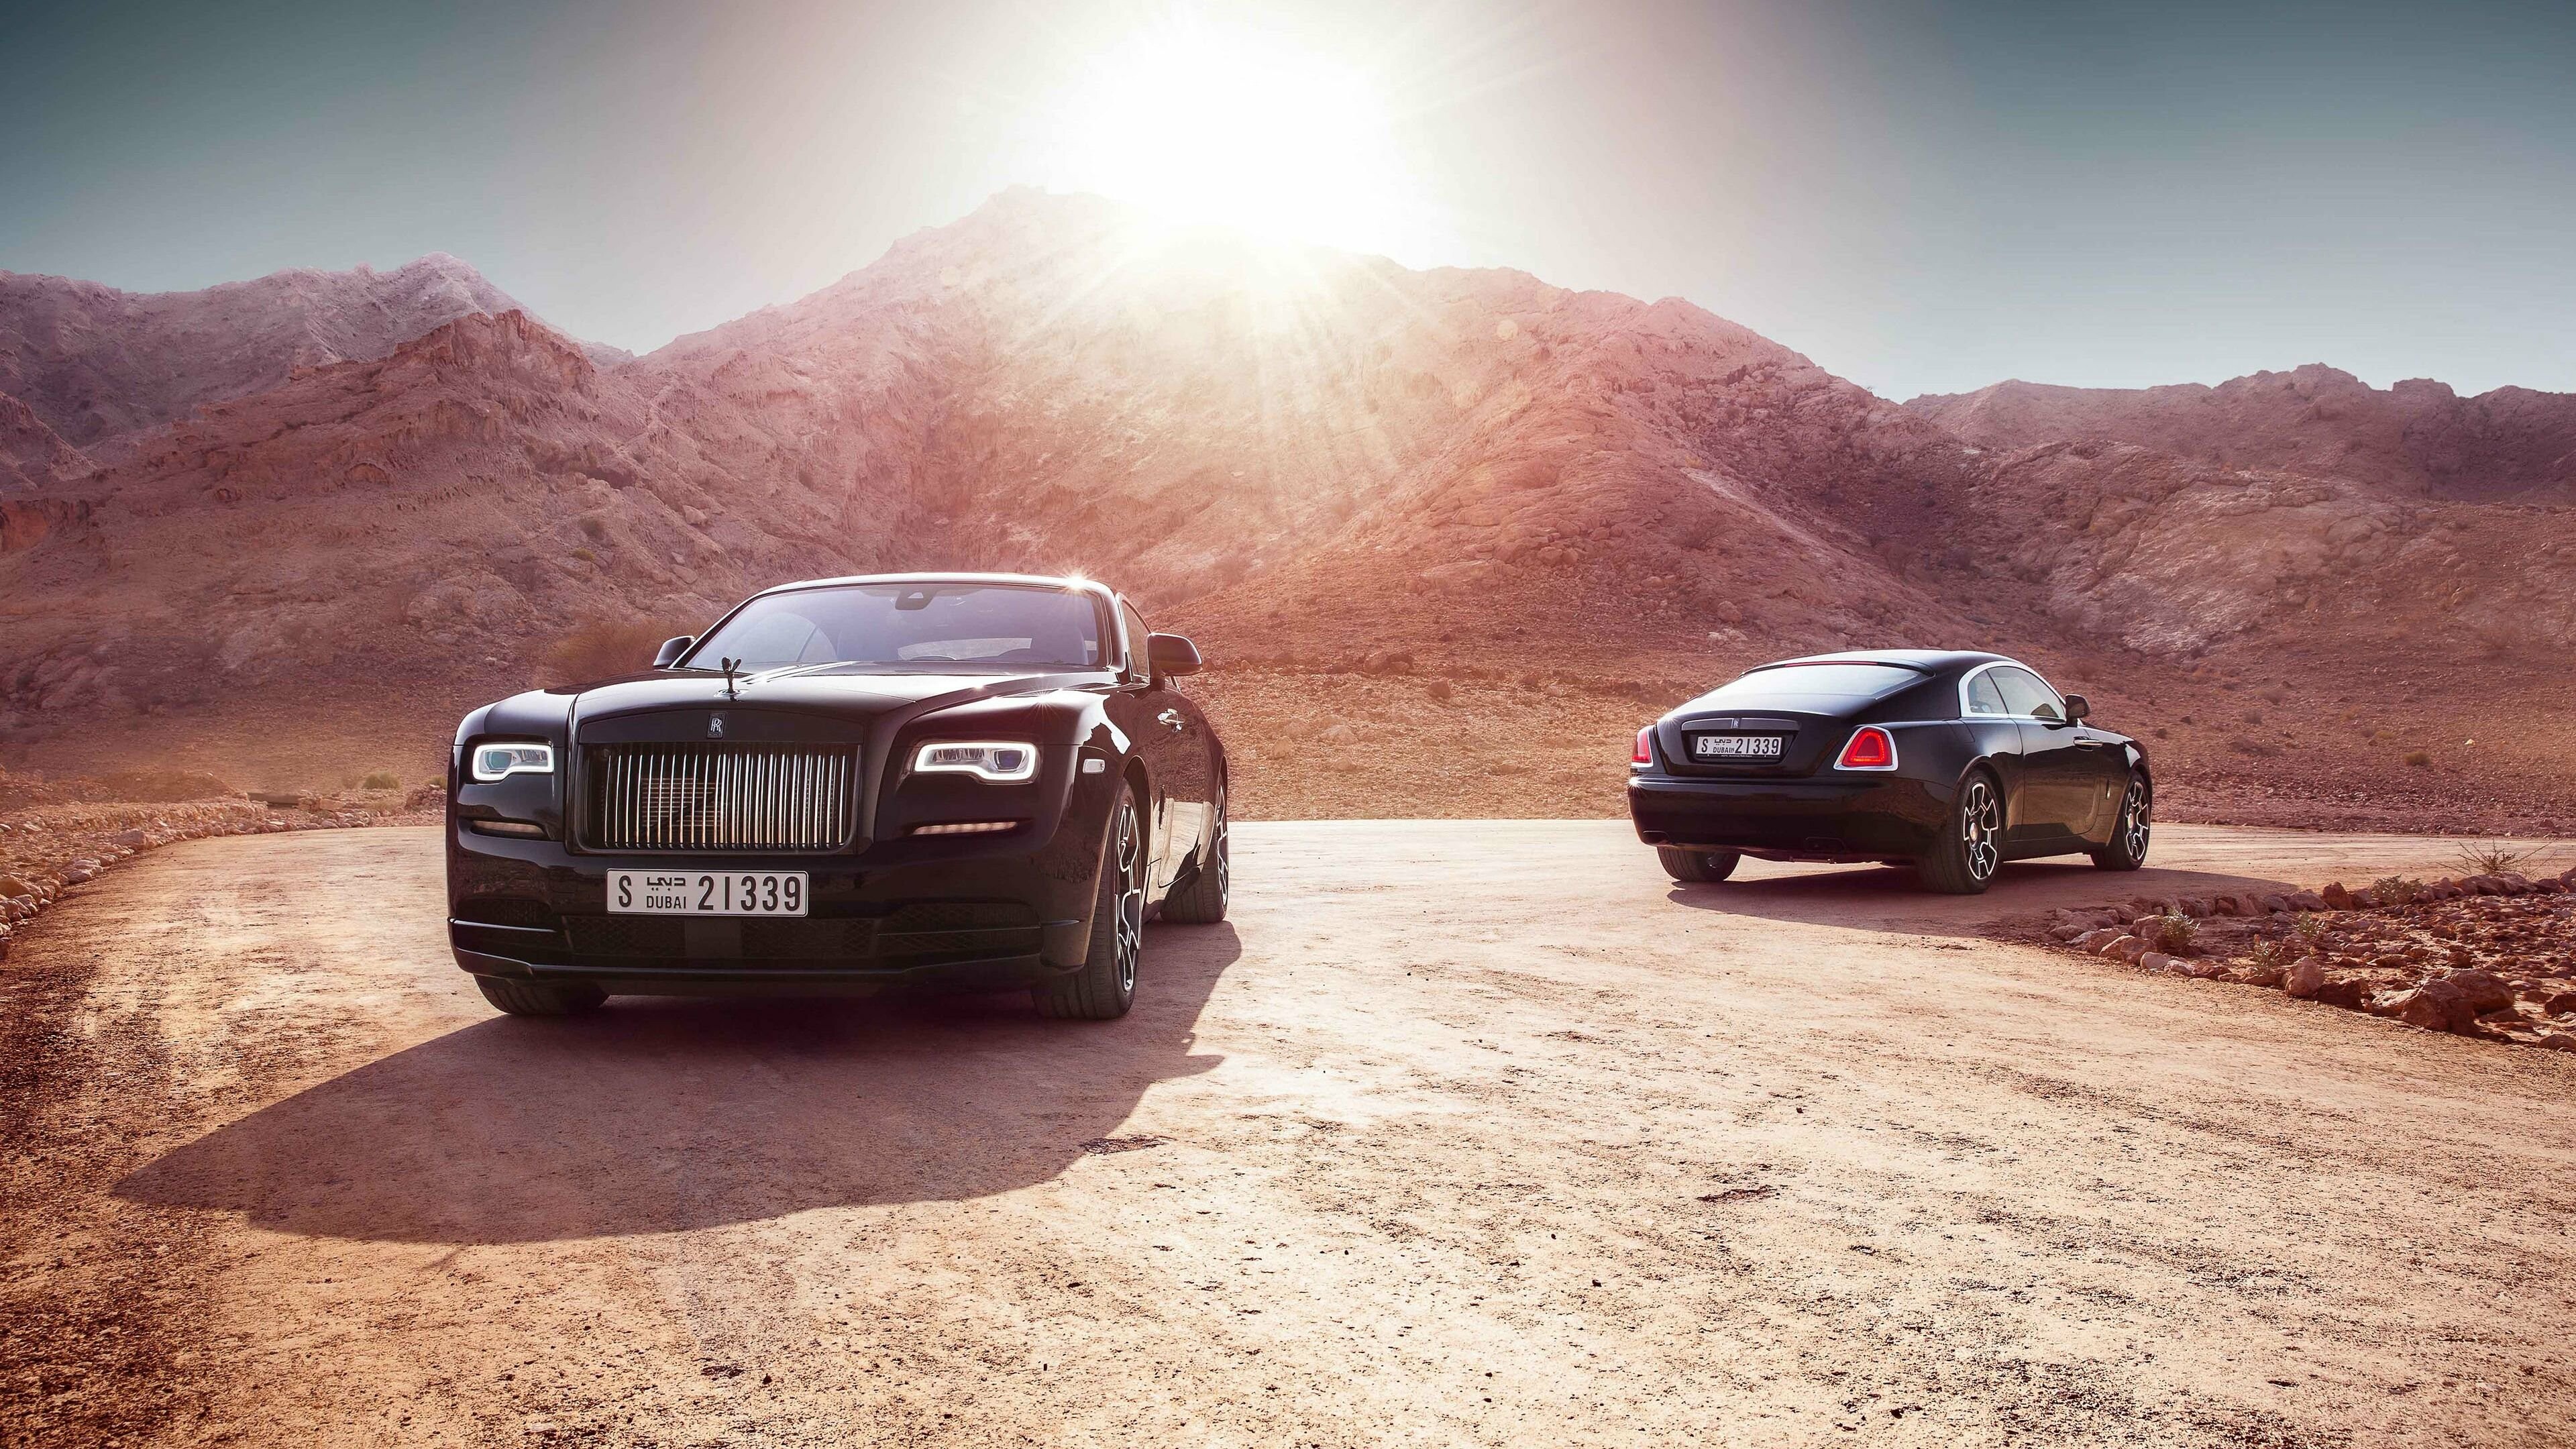 Rolls-Royce: Model Wraith, Shares its name with the original 1938 model. 3840x2160 4K Background.